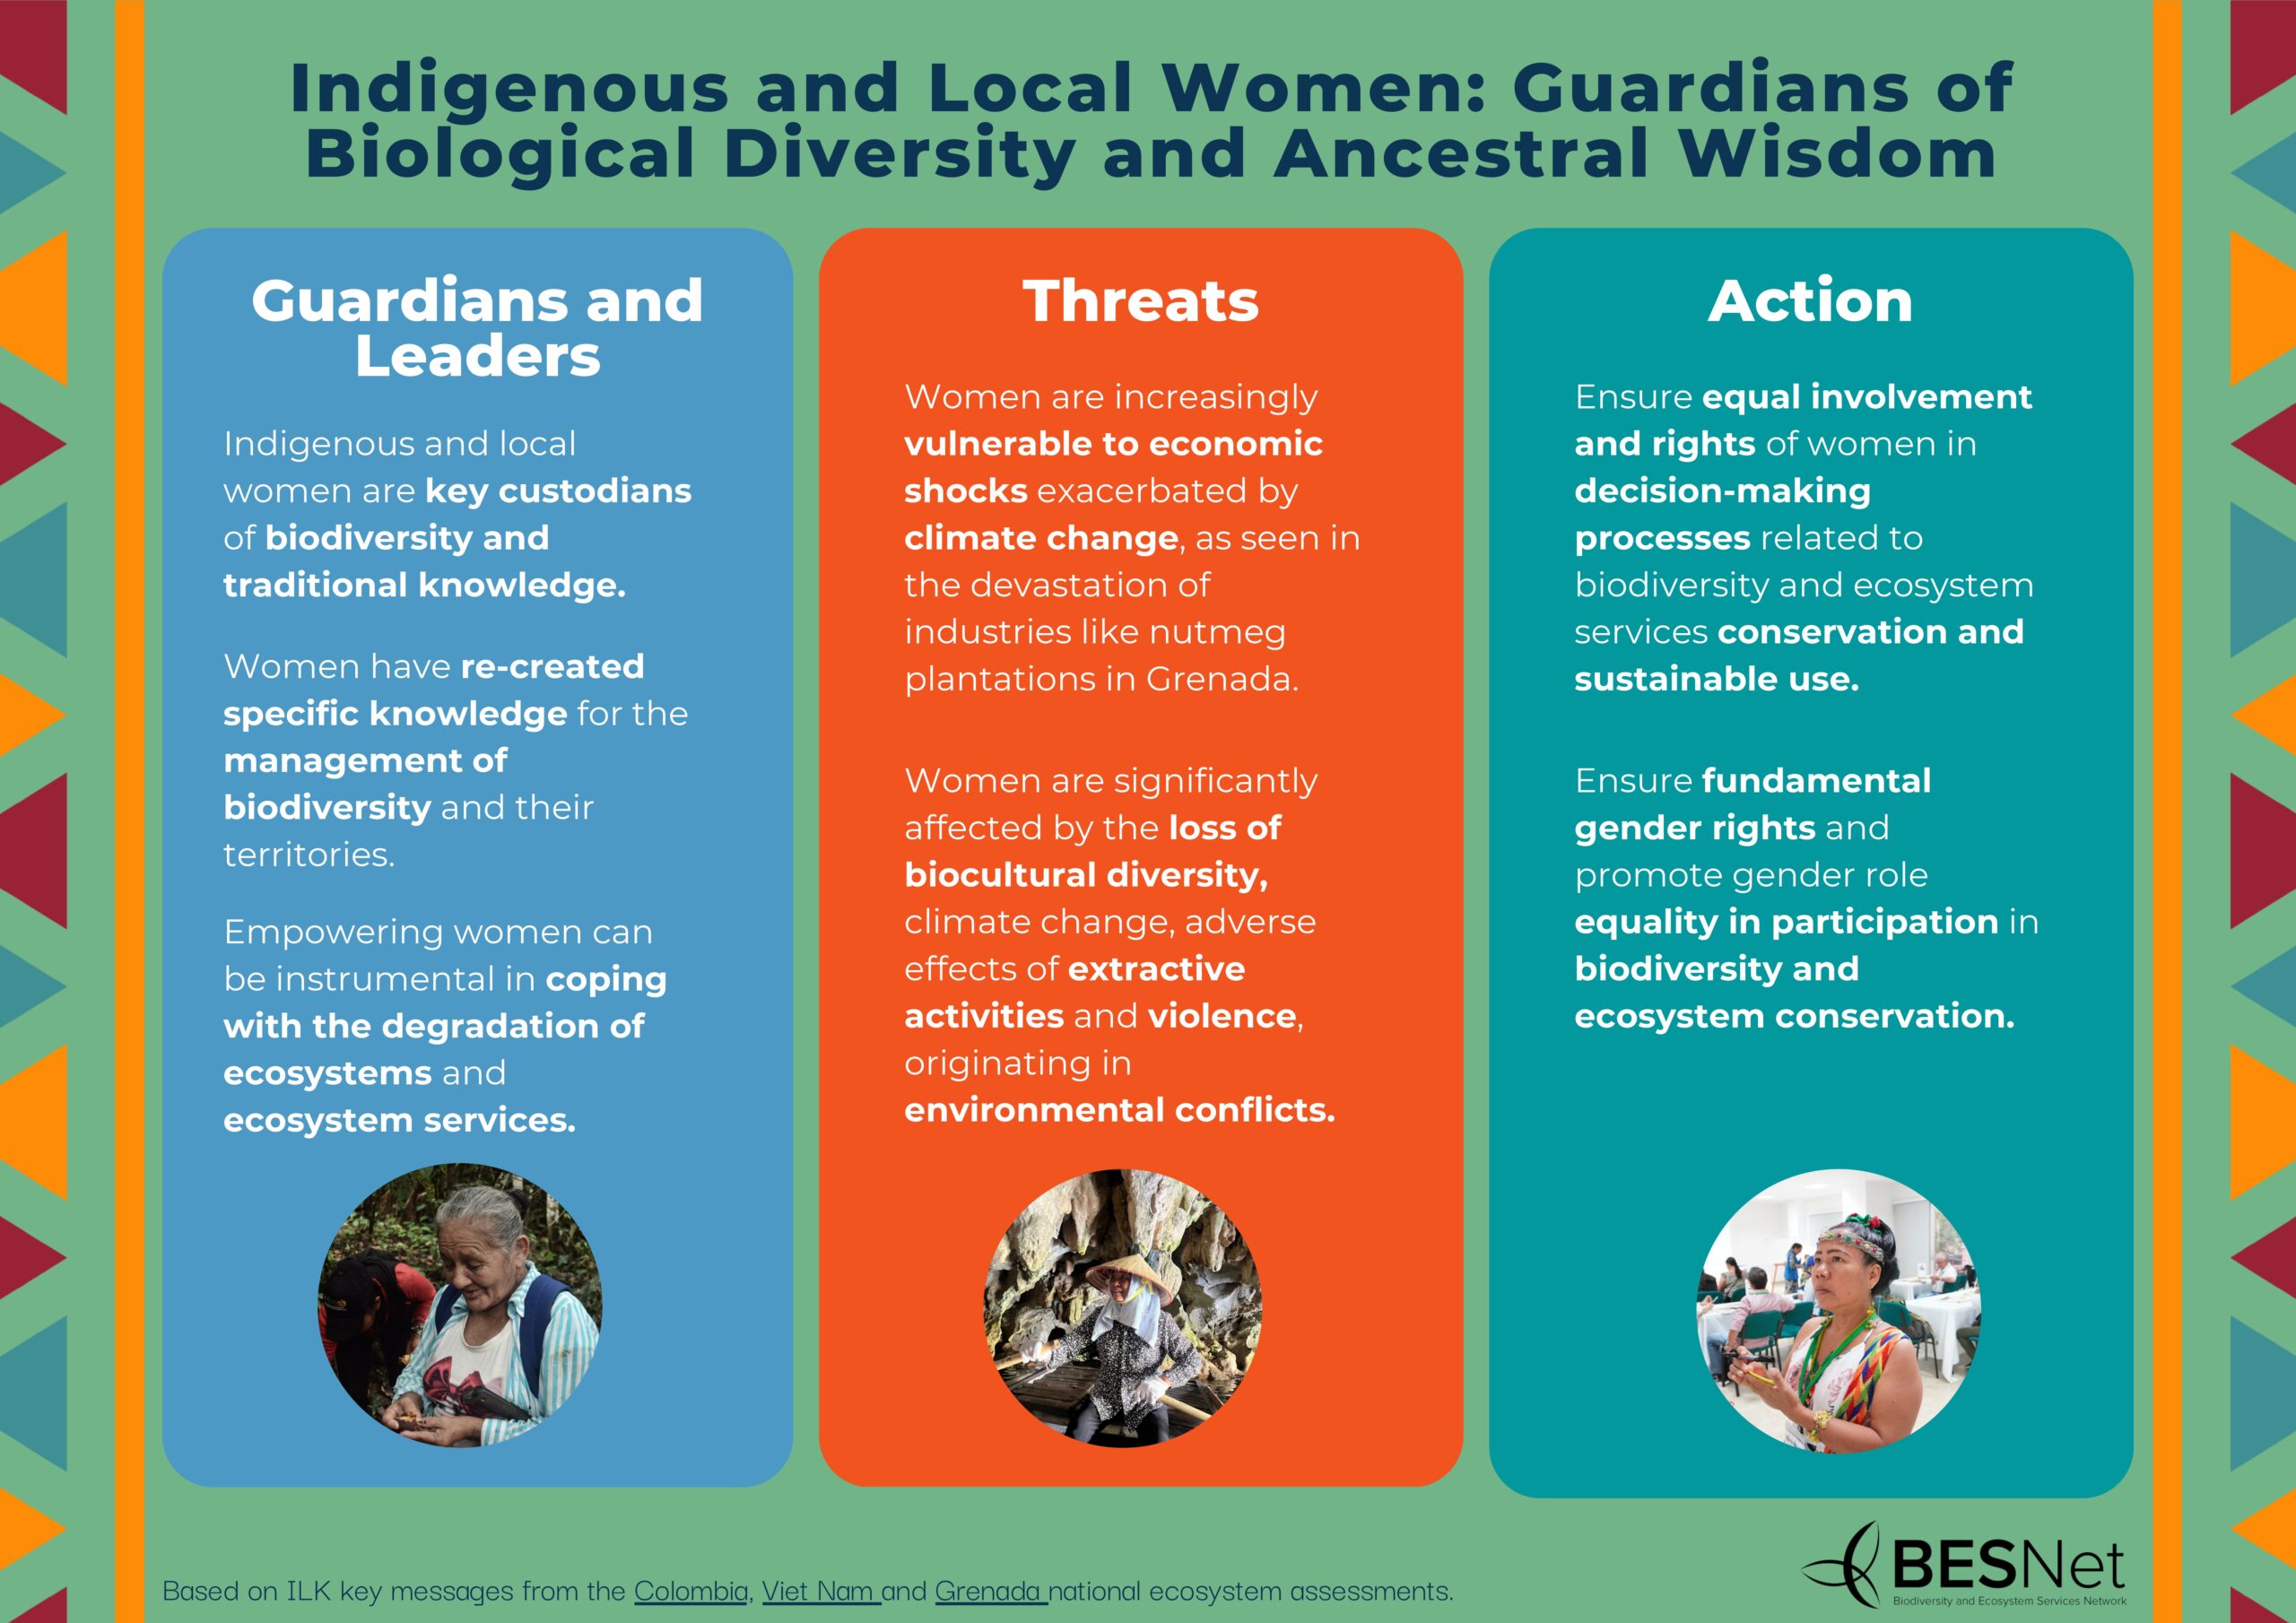 Infographic on Indigenous and Local Women: Guardians of Biological Diversity and Ancestral Wisdom